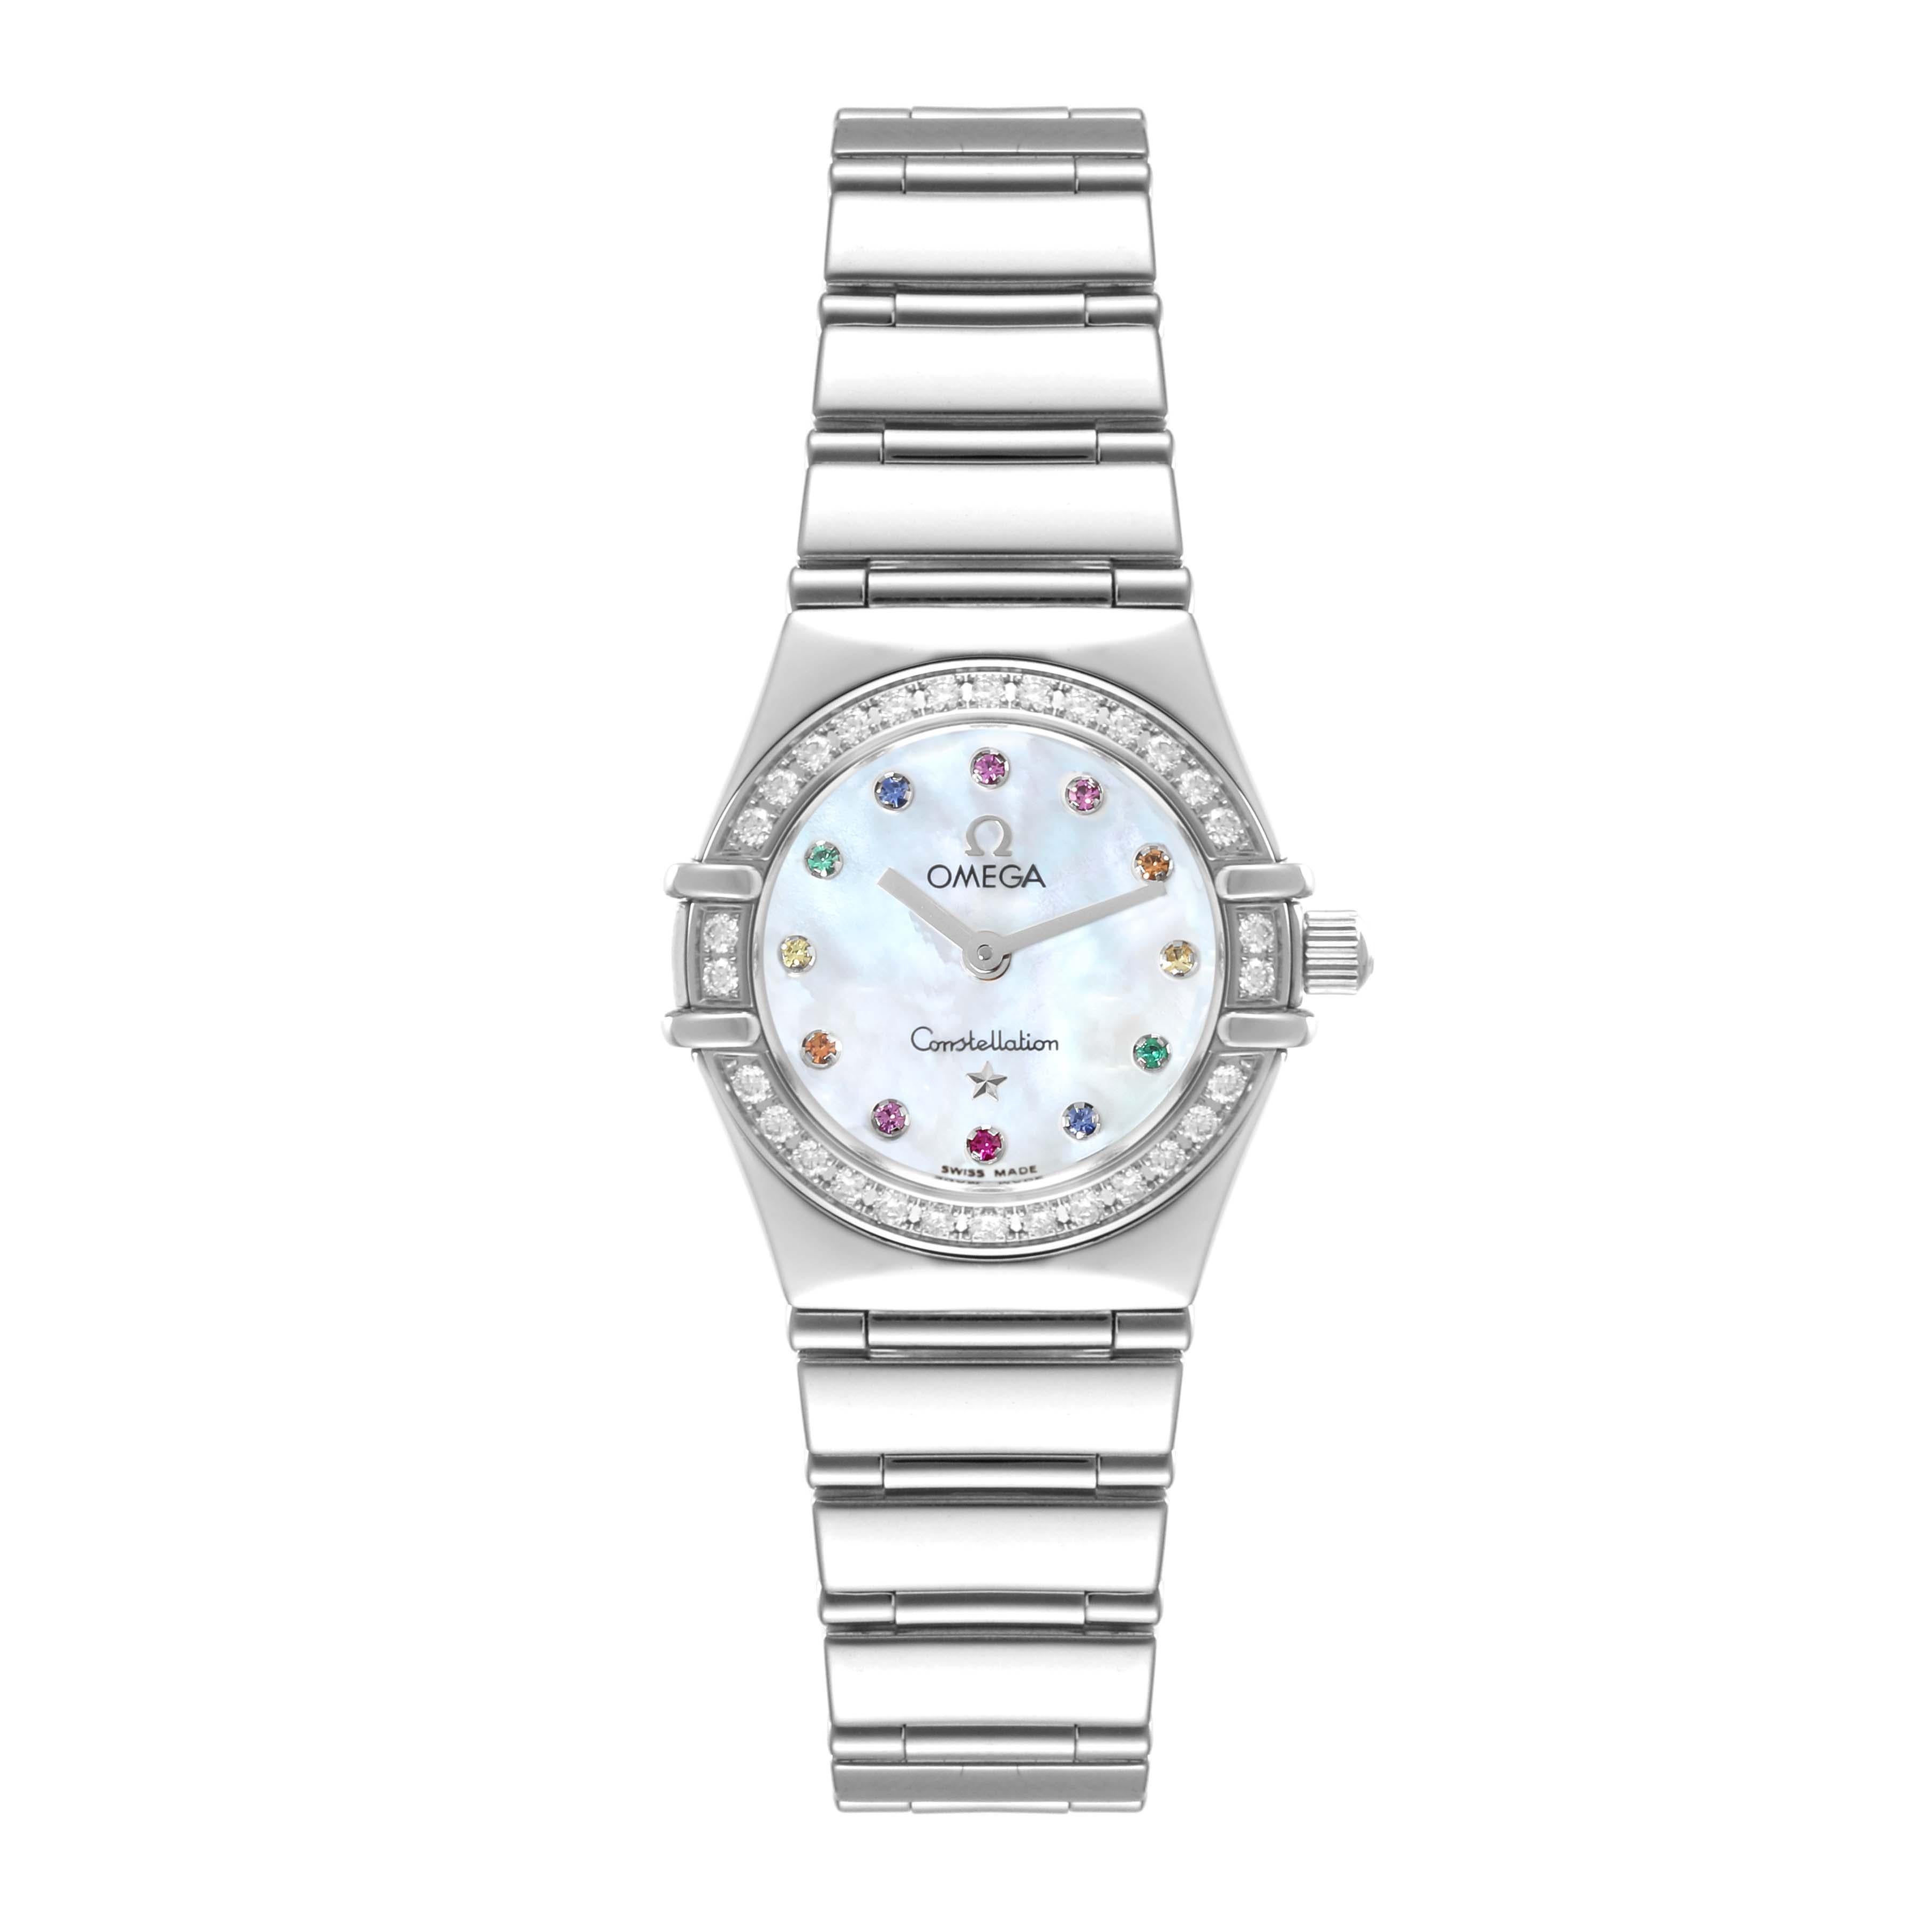 Omega Constellation Iris Mother Of Pearl Diamond Steel Ladies Watch 1465.79.00 Box Card. Quartz movement. Stainless steel round case 22.5 mm in diameter. Stainless steel bezel set with original Omega factory diamonds. Scratch resistant sapphire